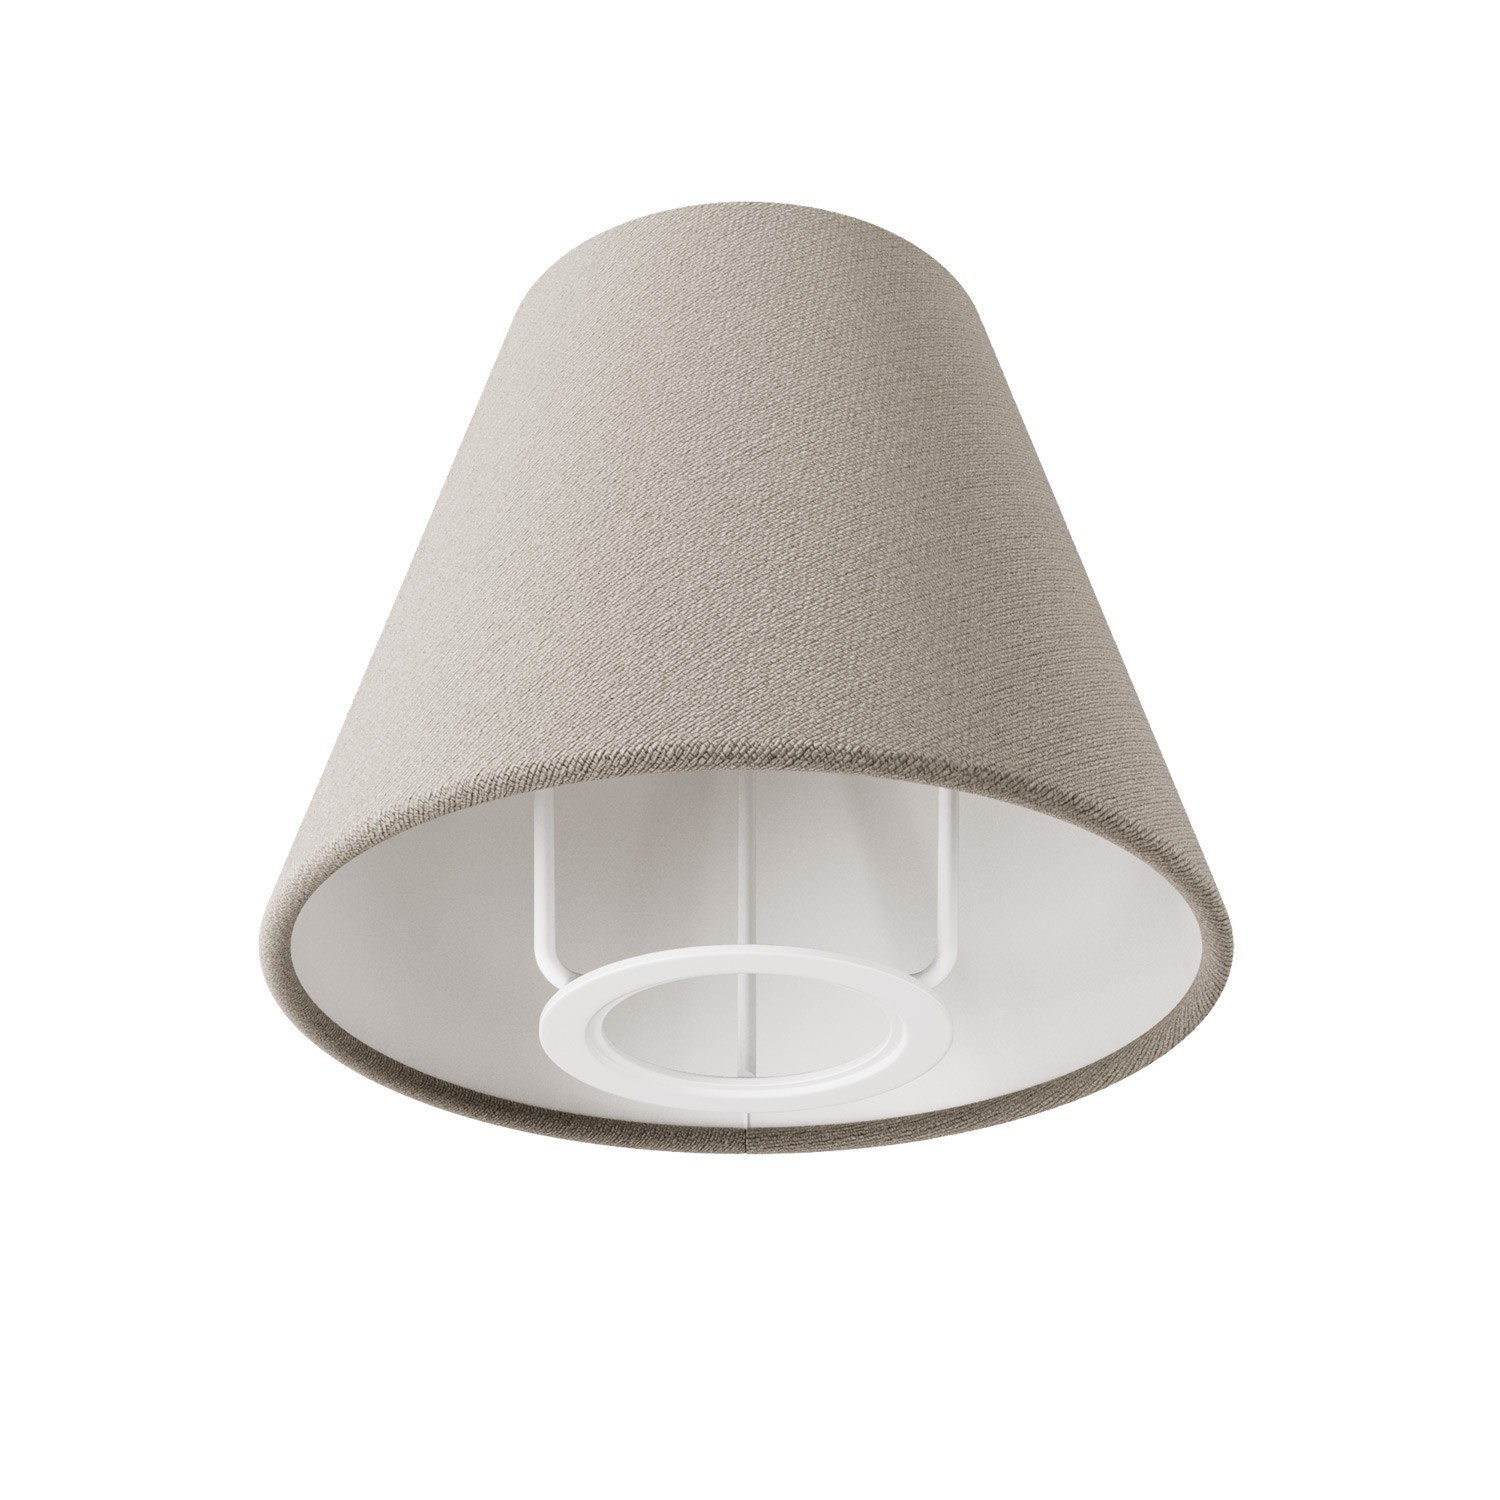 Impero Mini lampshade with E27 fitting for wall fixtures or table lamps